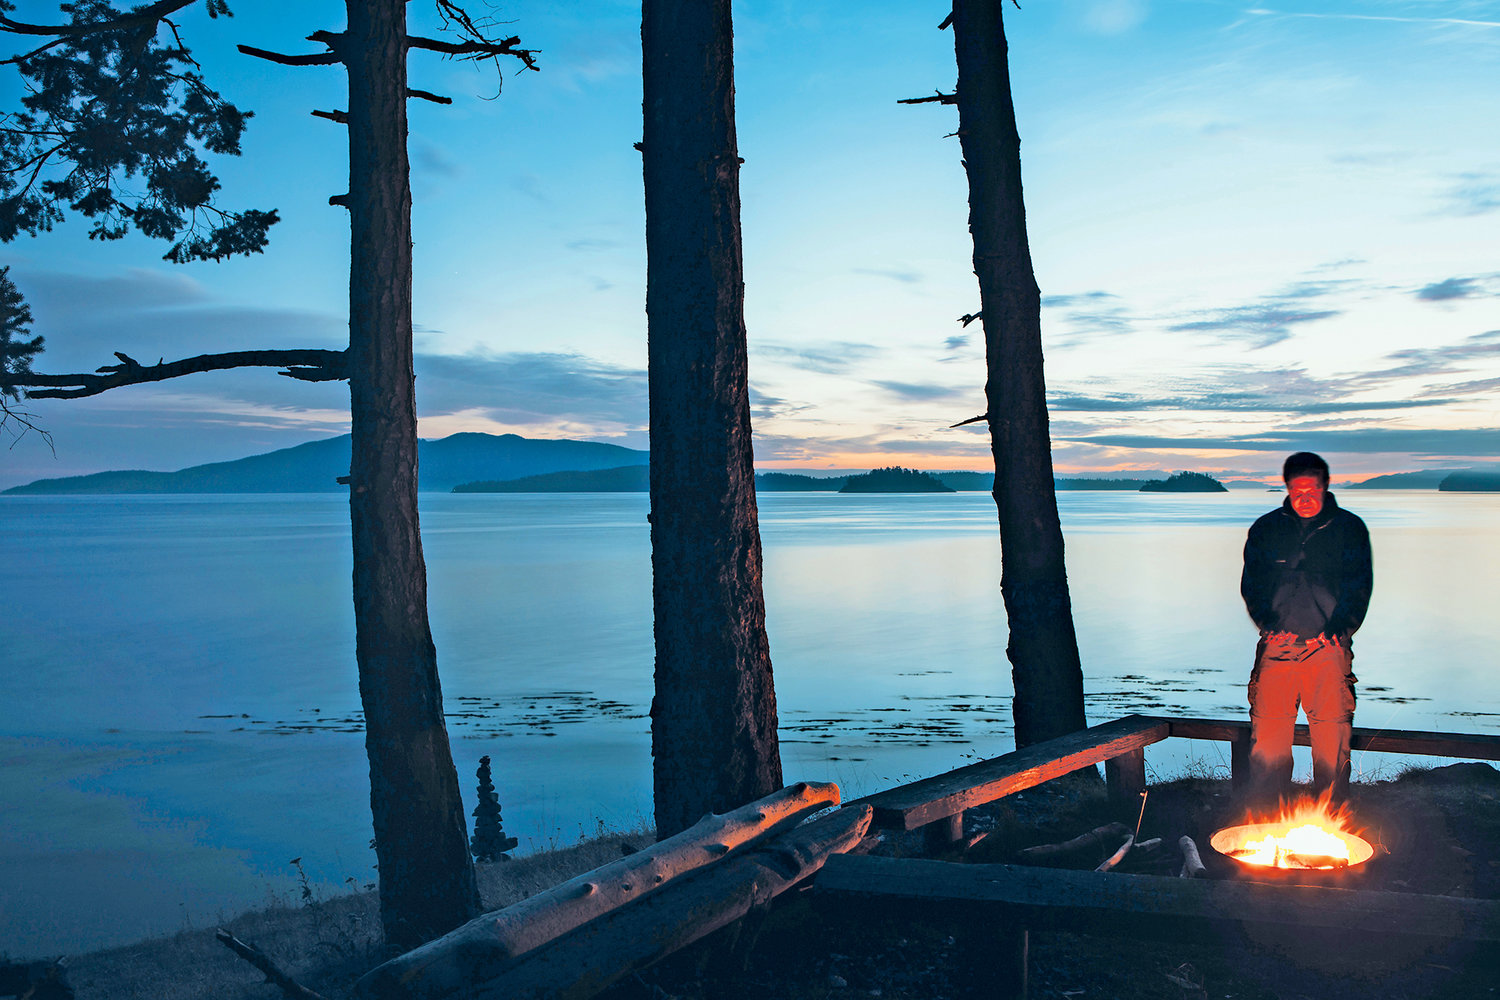 Man standing by campfire at dusk, San Juan Islands in the distance, Washington, USA.